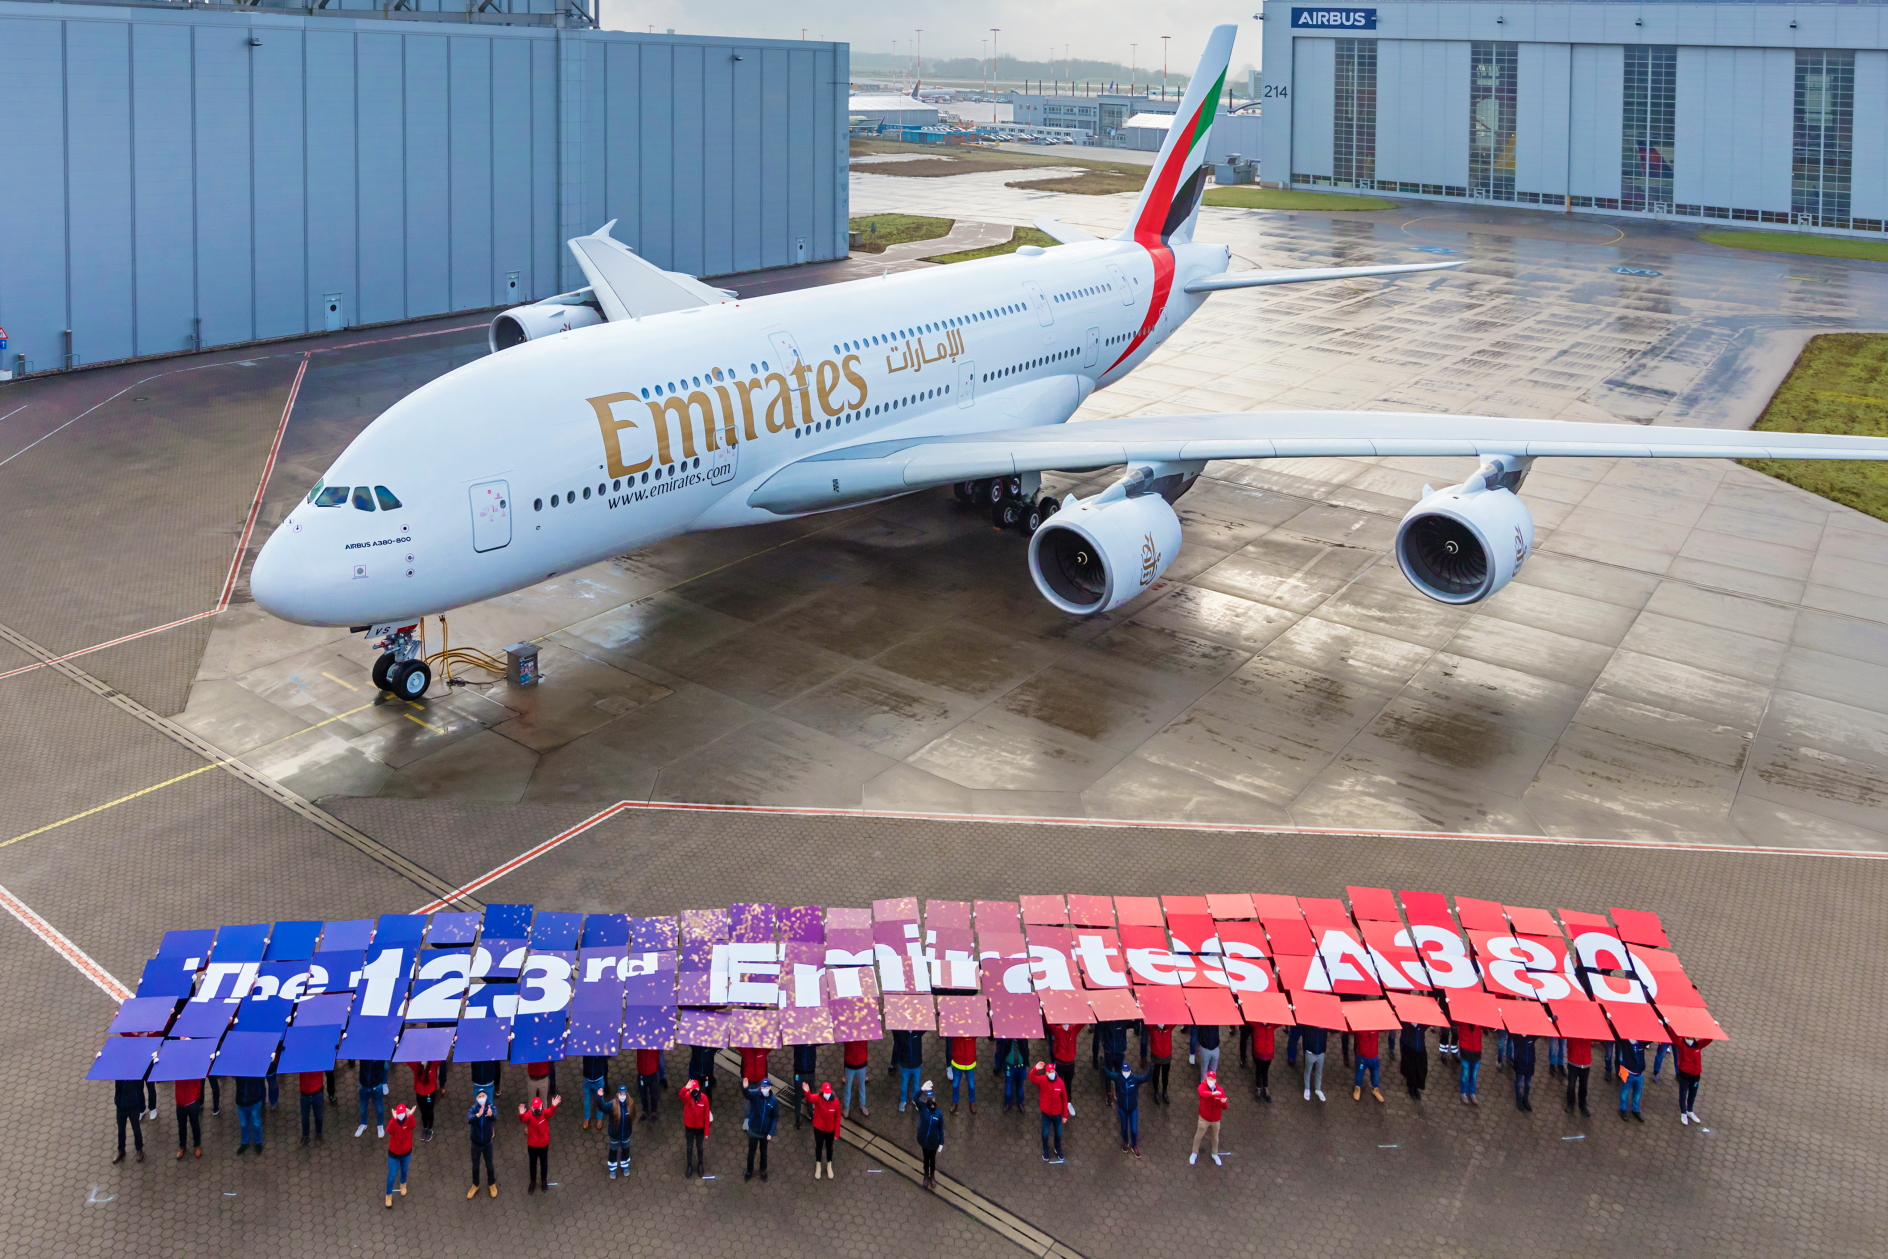 Emirates took delivery of its 123rd Airbus A380 superjumbo jet on Thursday, the final new A380 aircraft to join the airline’s fleet. Click to enlarge.